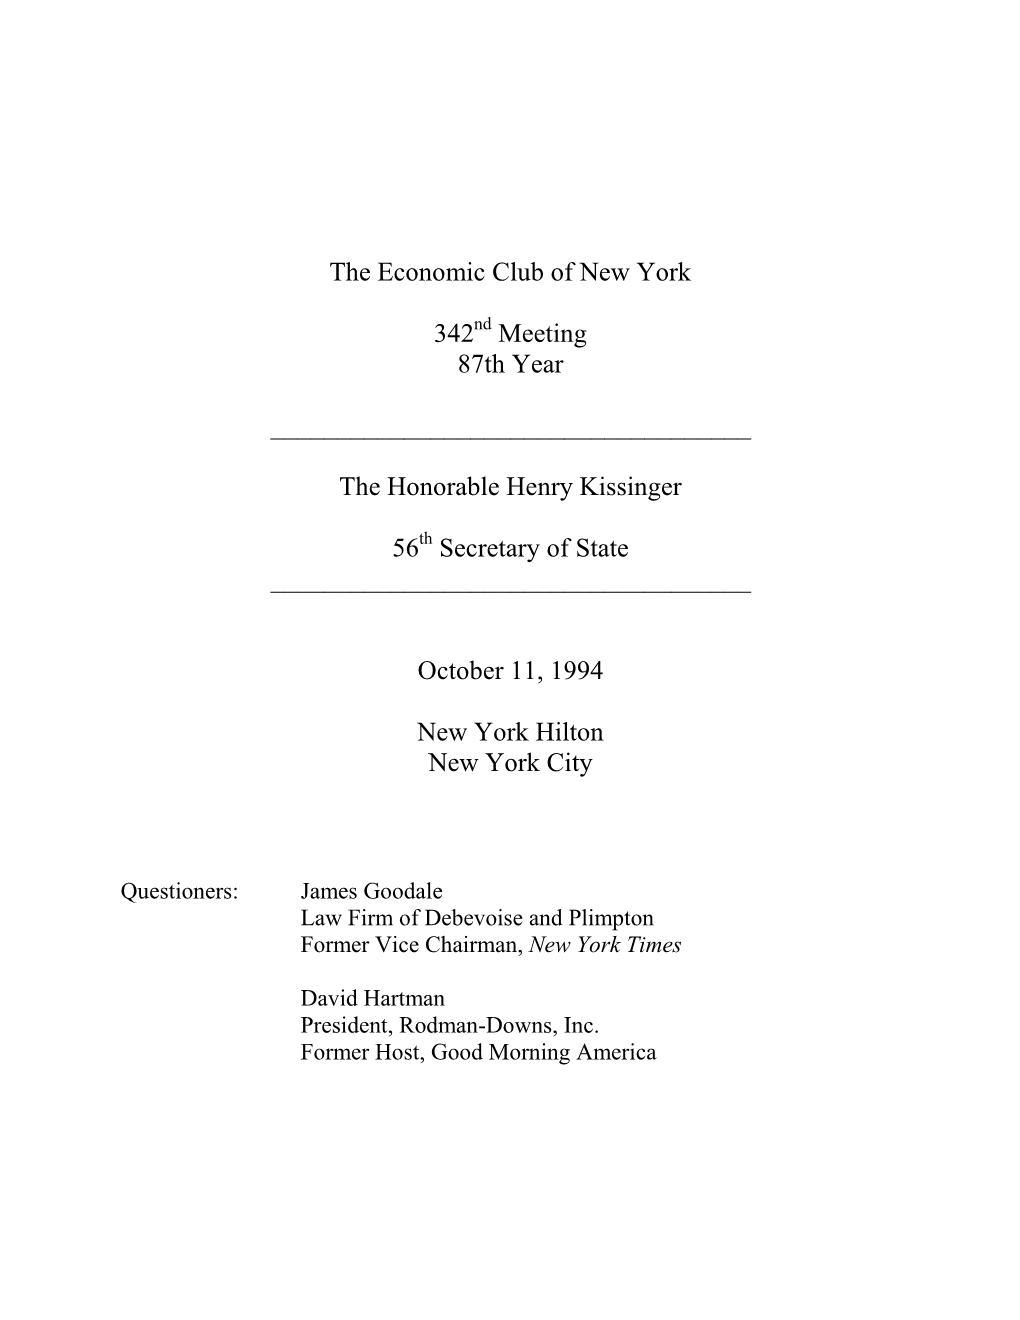 The Economic Club of New York 342 Meeting 87Th Year The